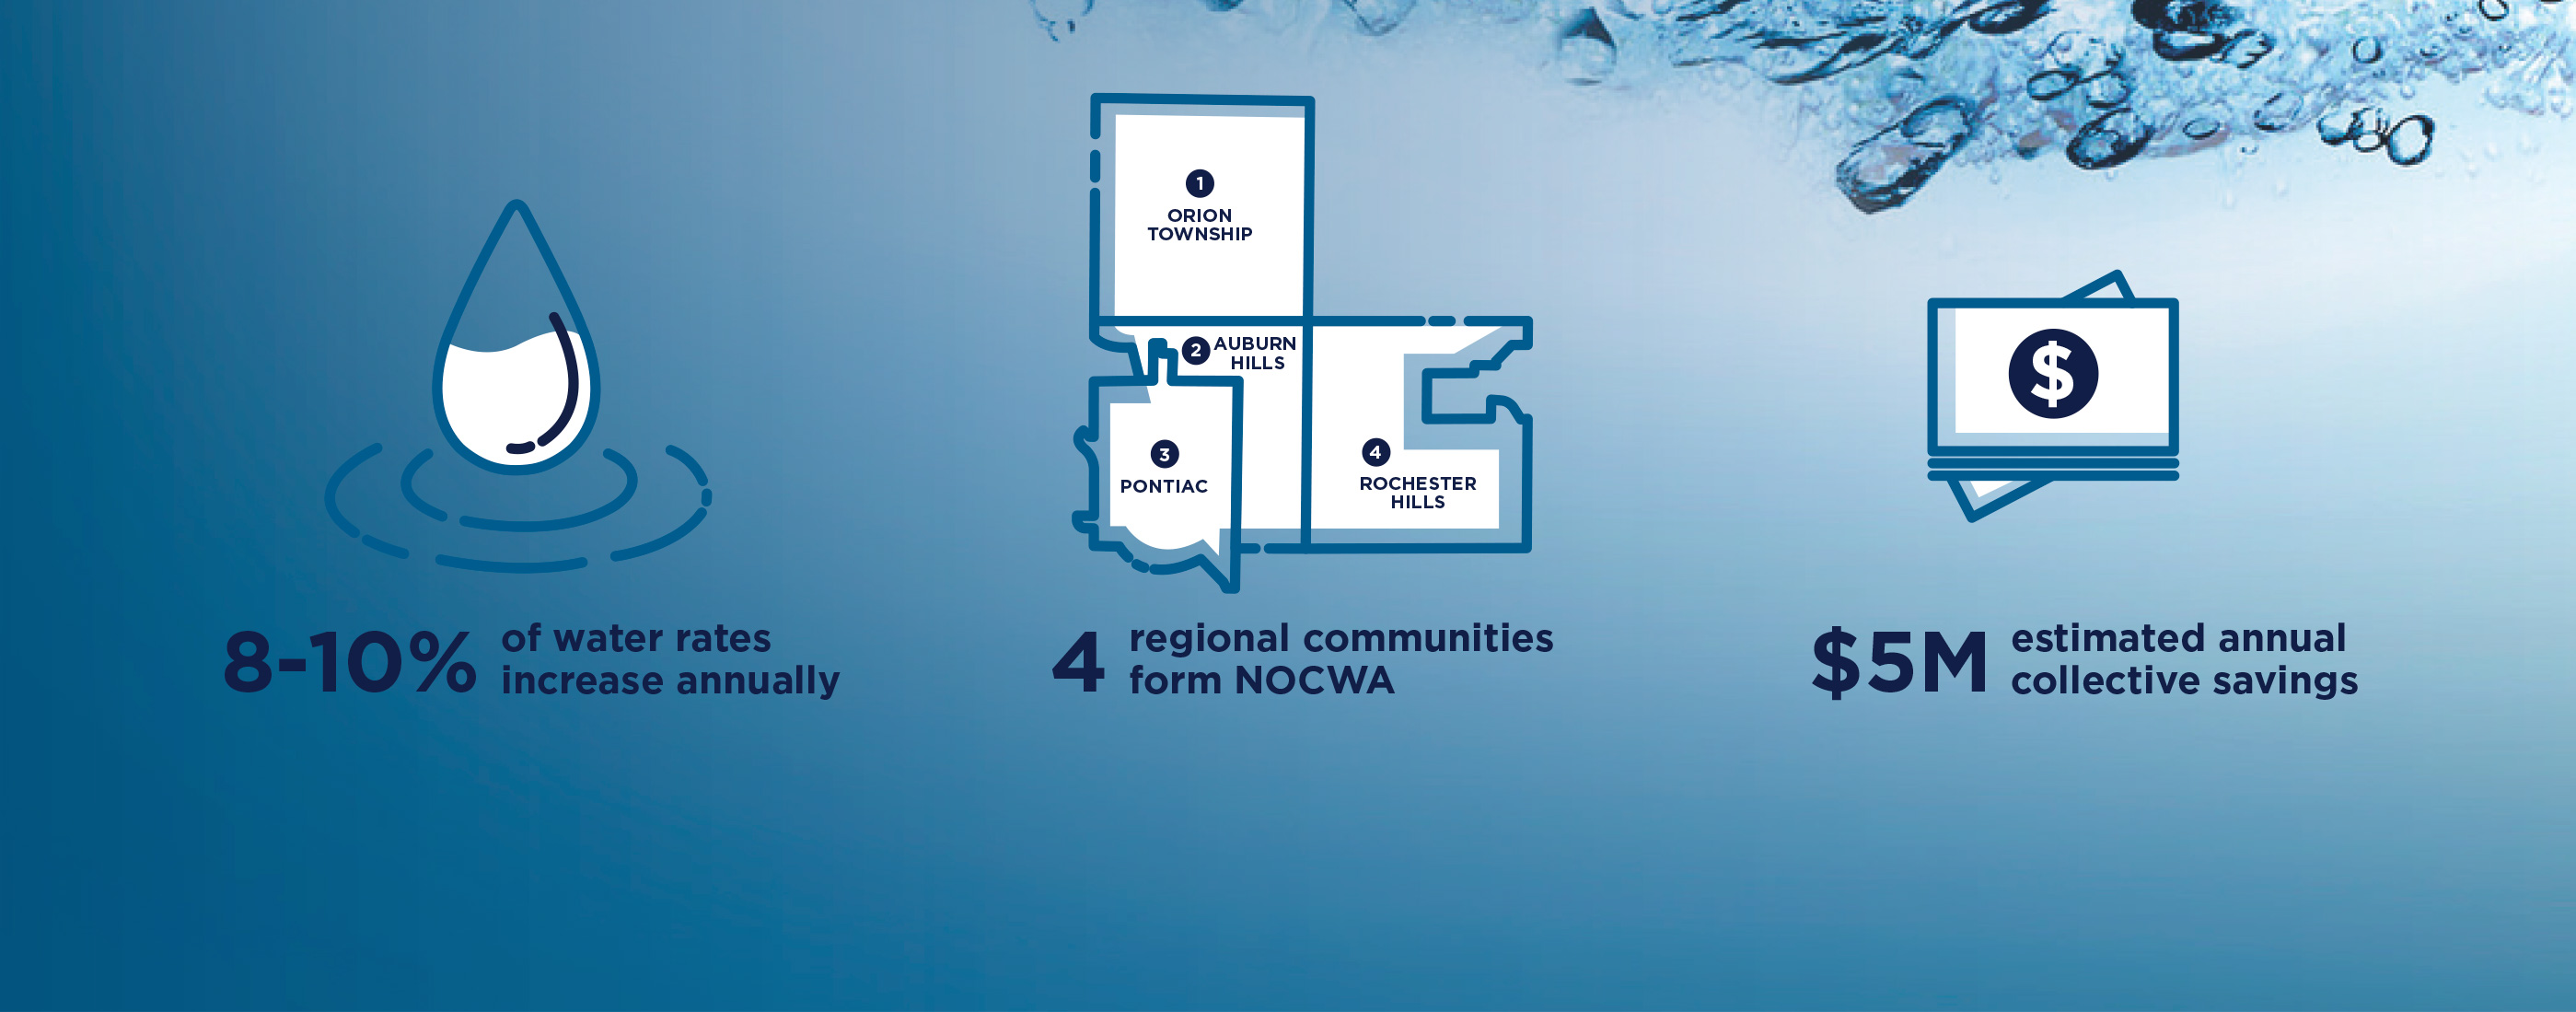 The development of NOCWA led to significant water pressure increase and collective savings of $5 million annually.